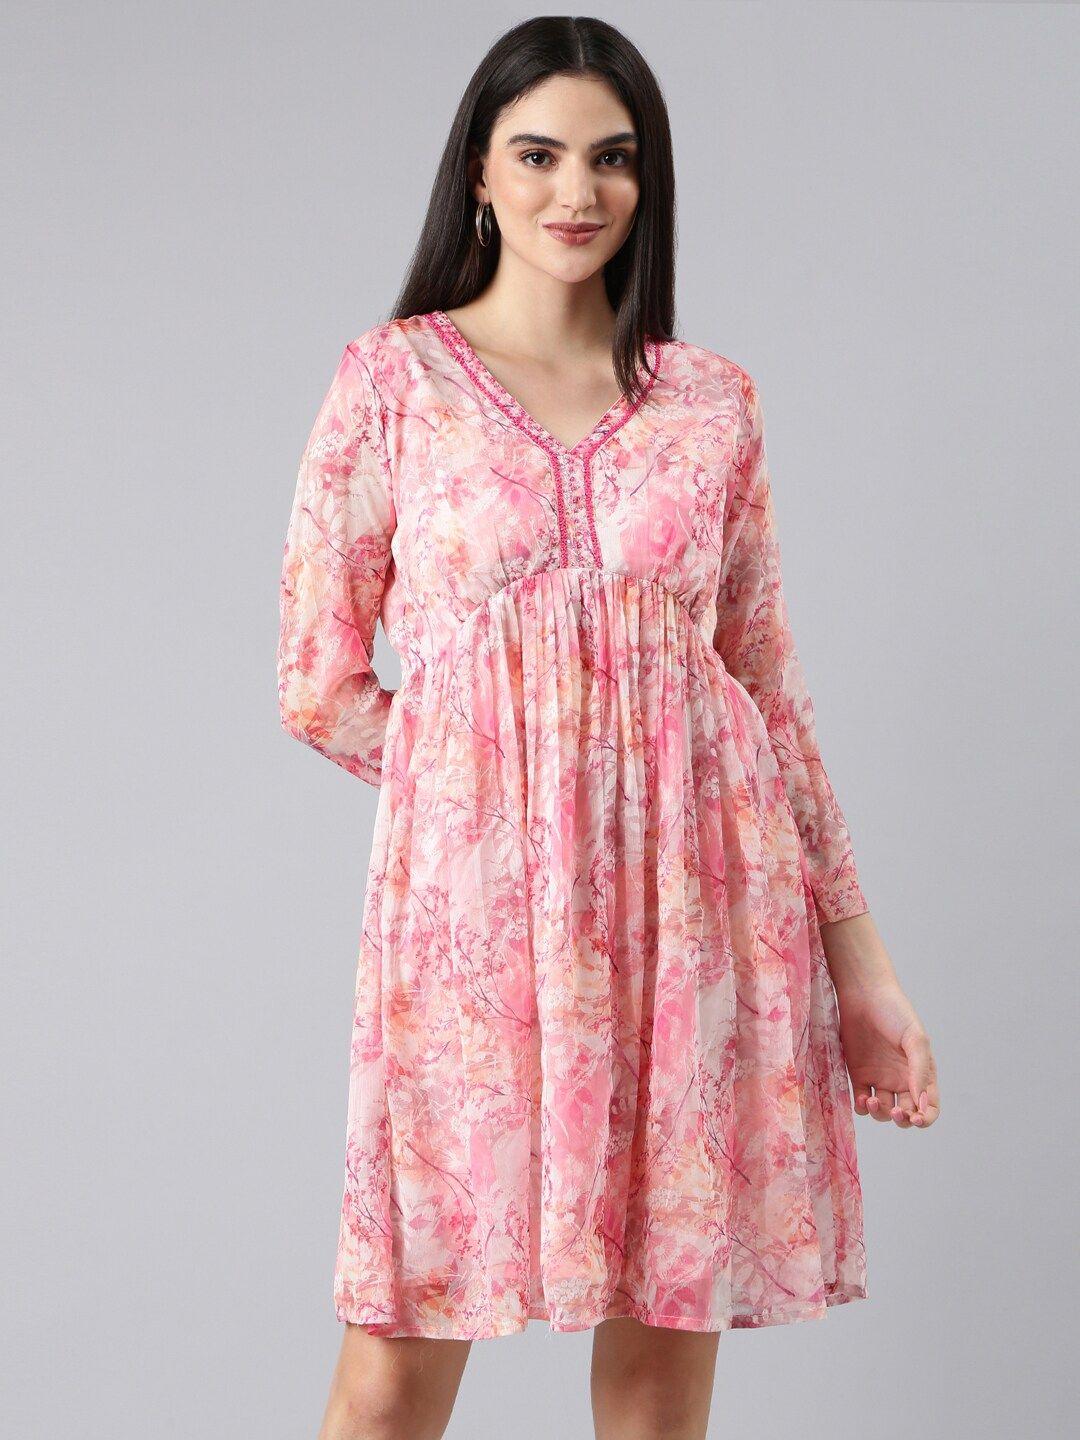 showoff-floral-printed-sequinned-chiffon-empire-dress